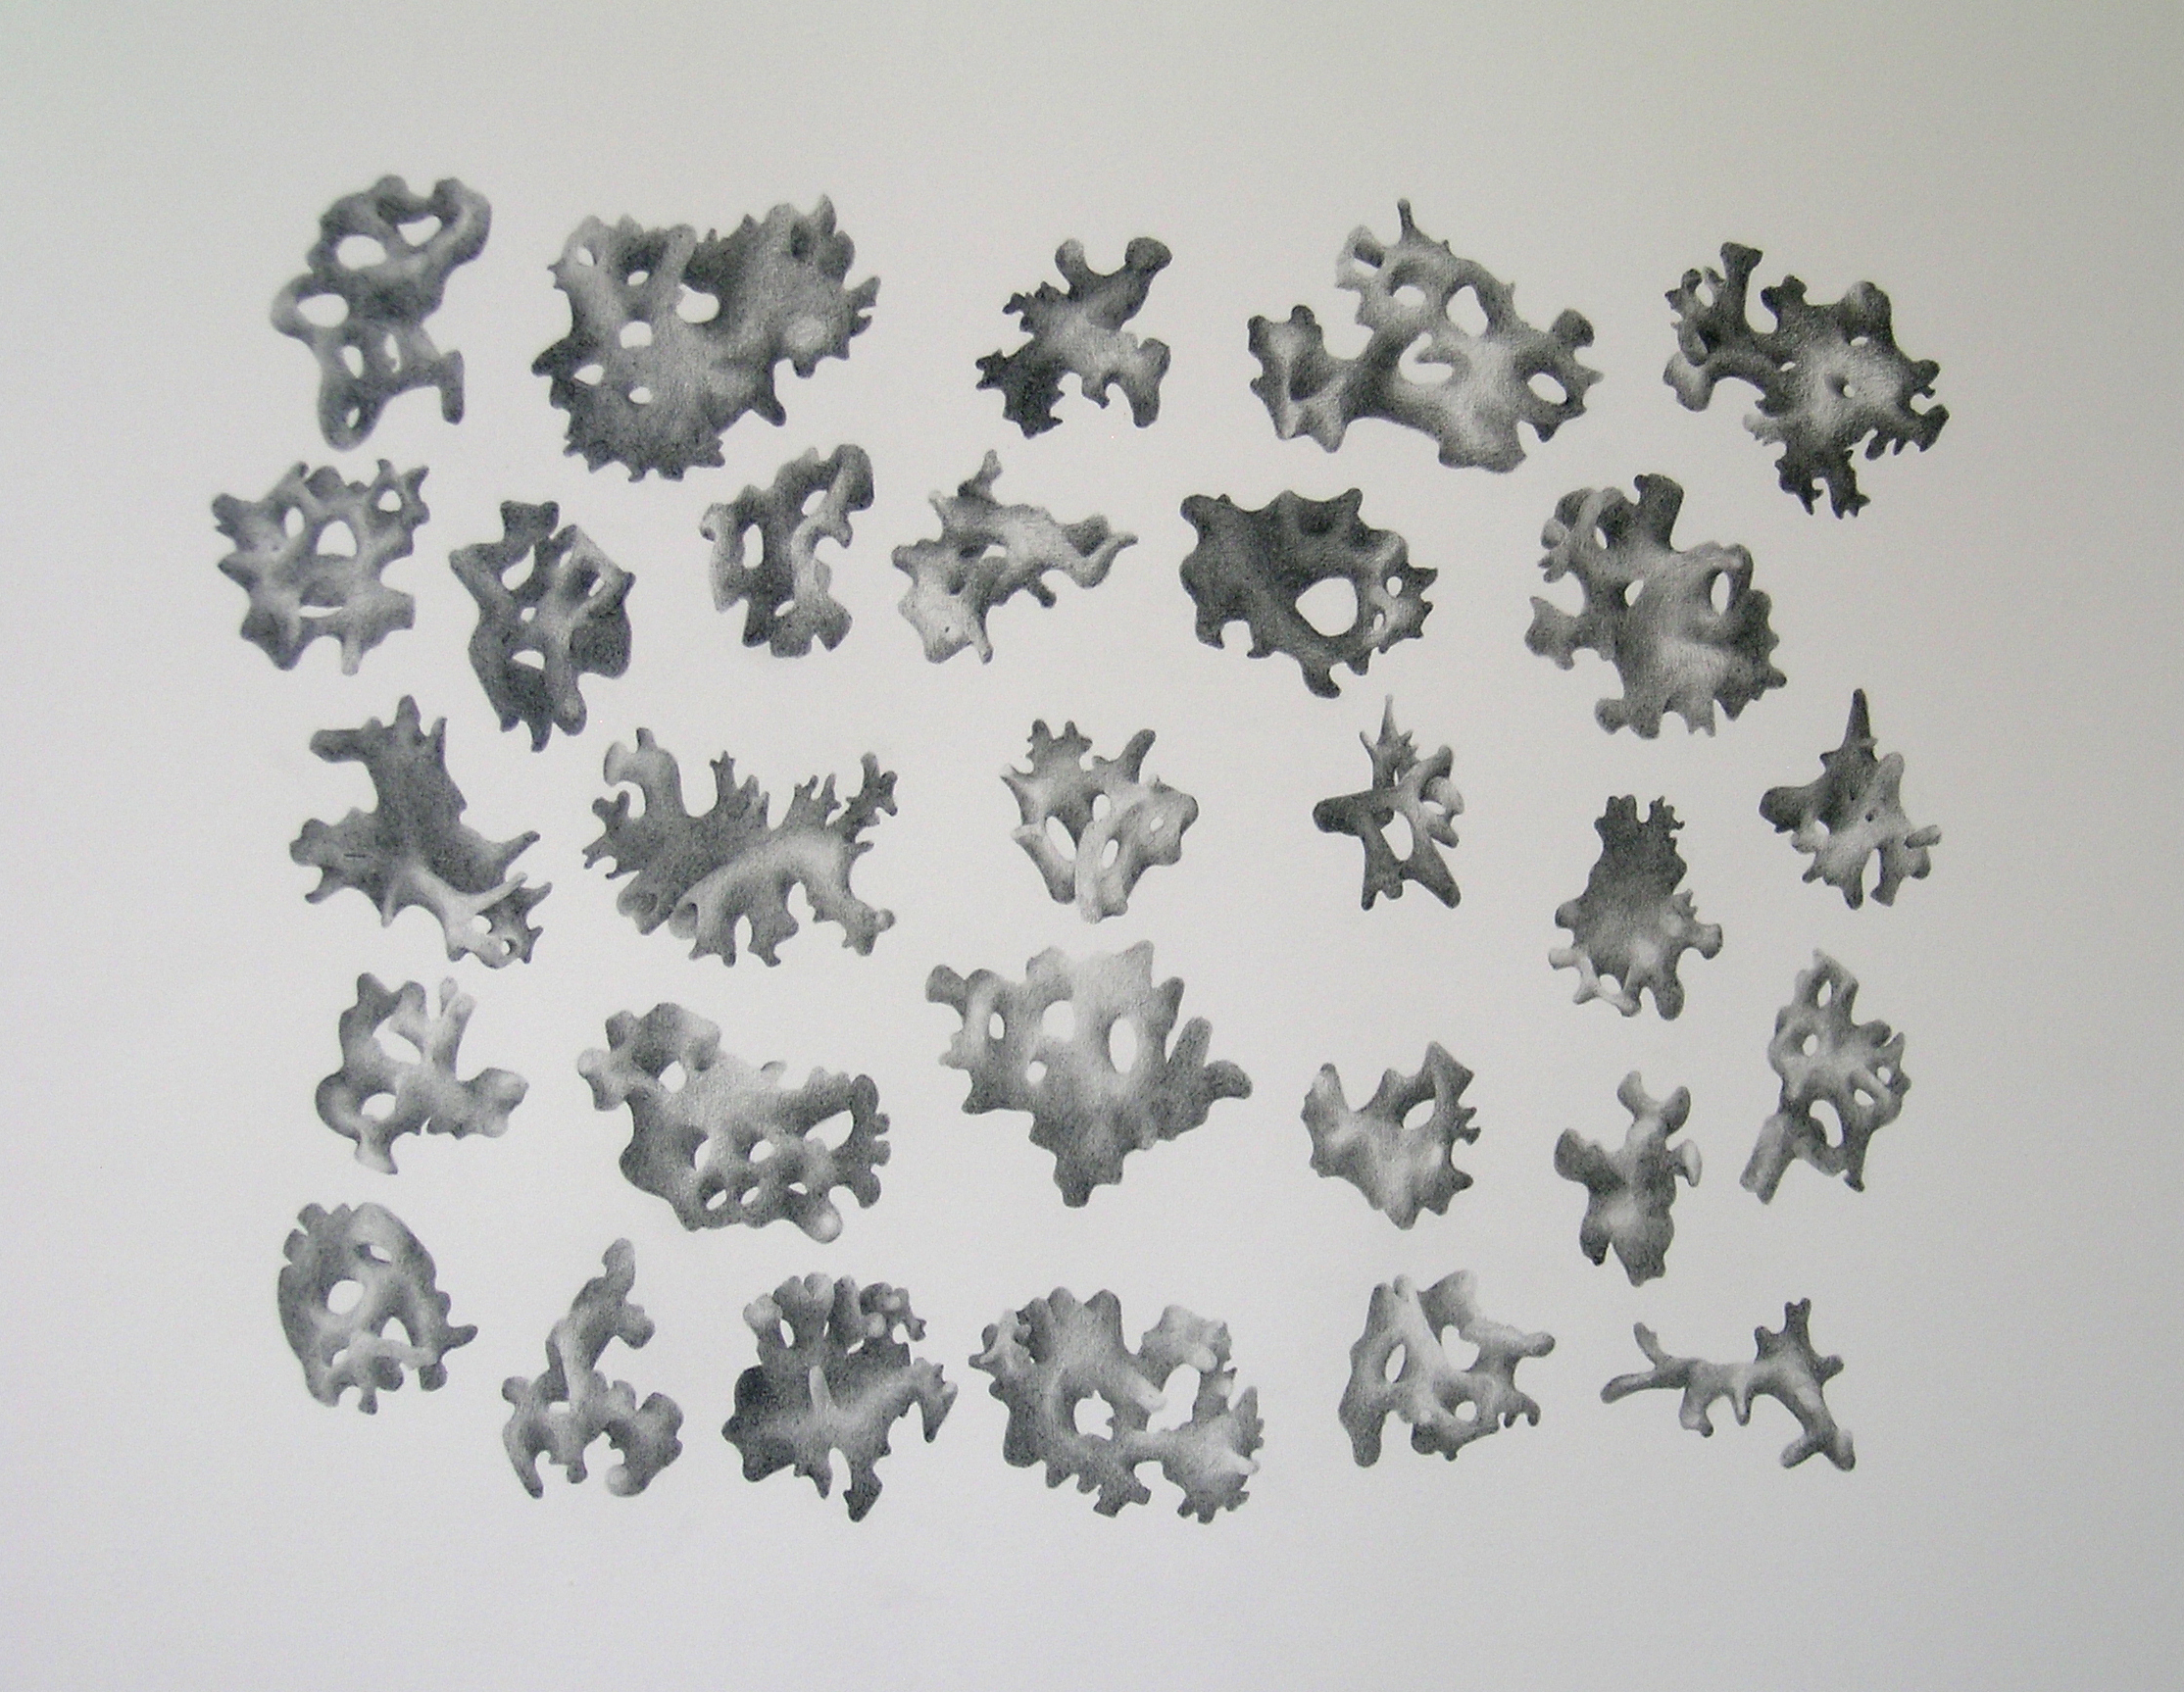  Berneray Beach Coral, 2010   Graphite on Hahnemuhle paper, 300gms, 30 x 42 cms  